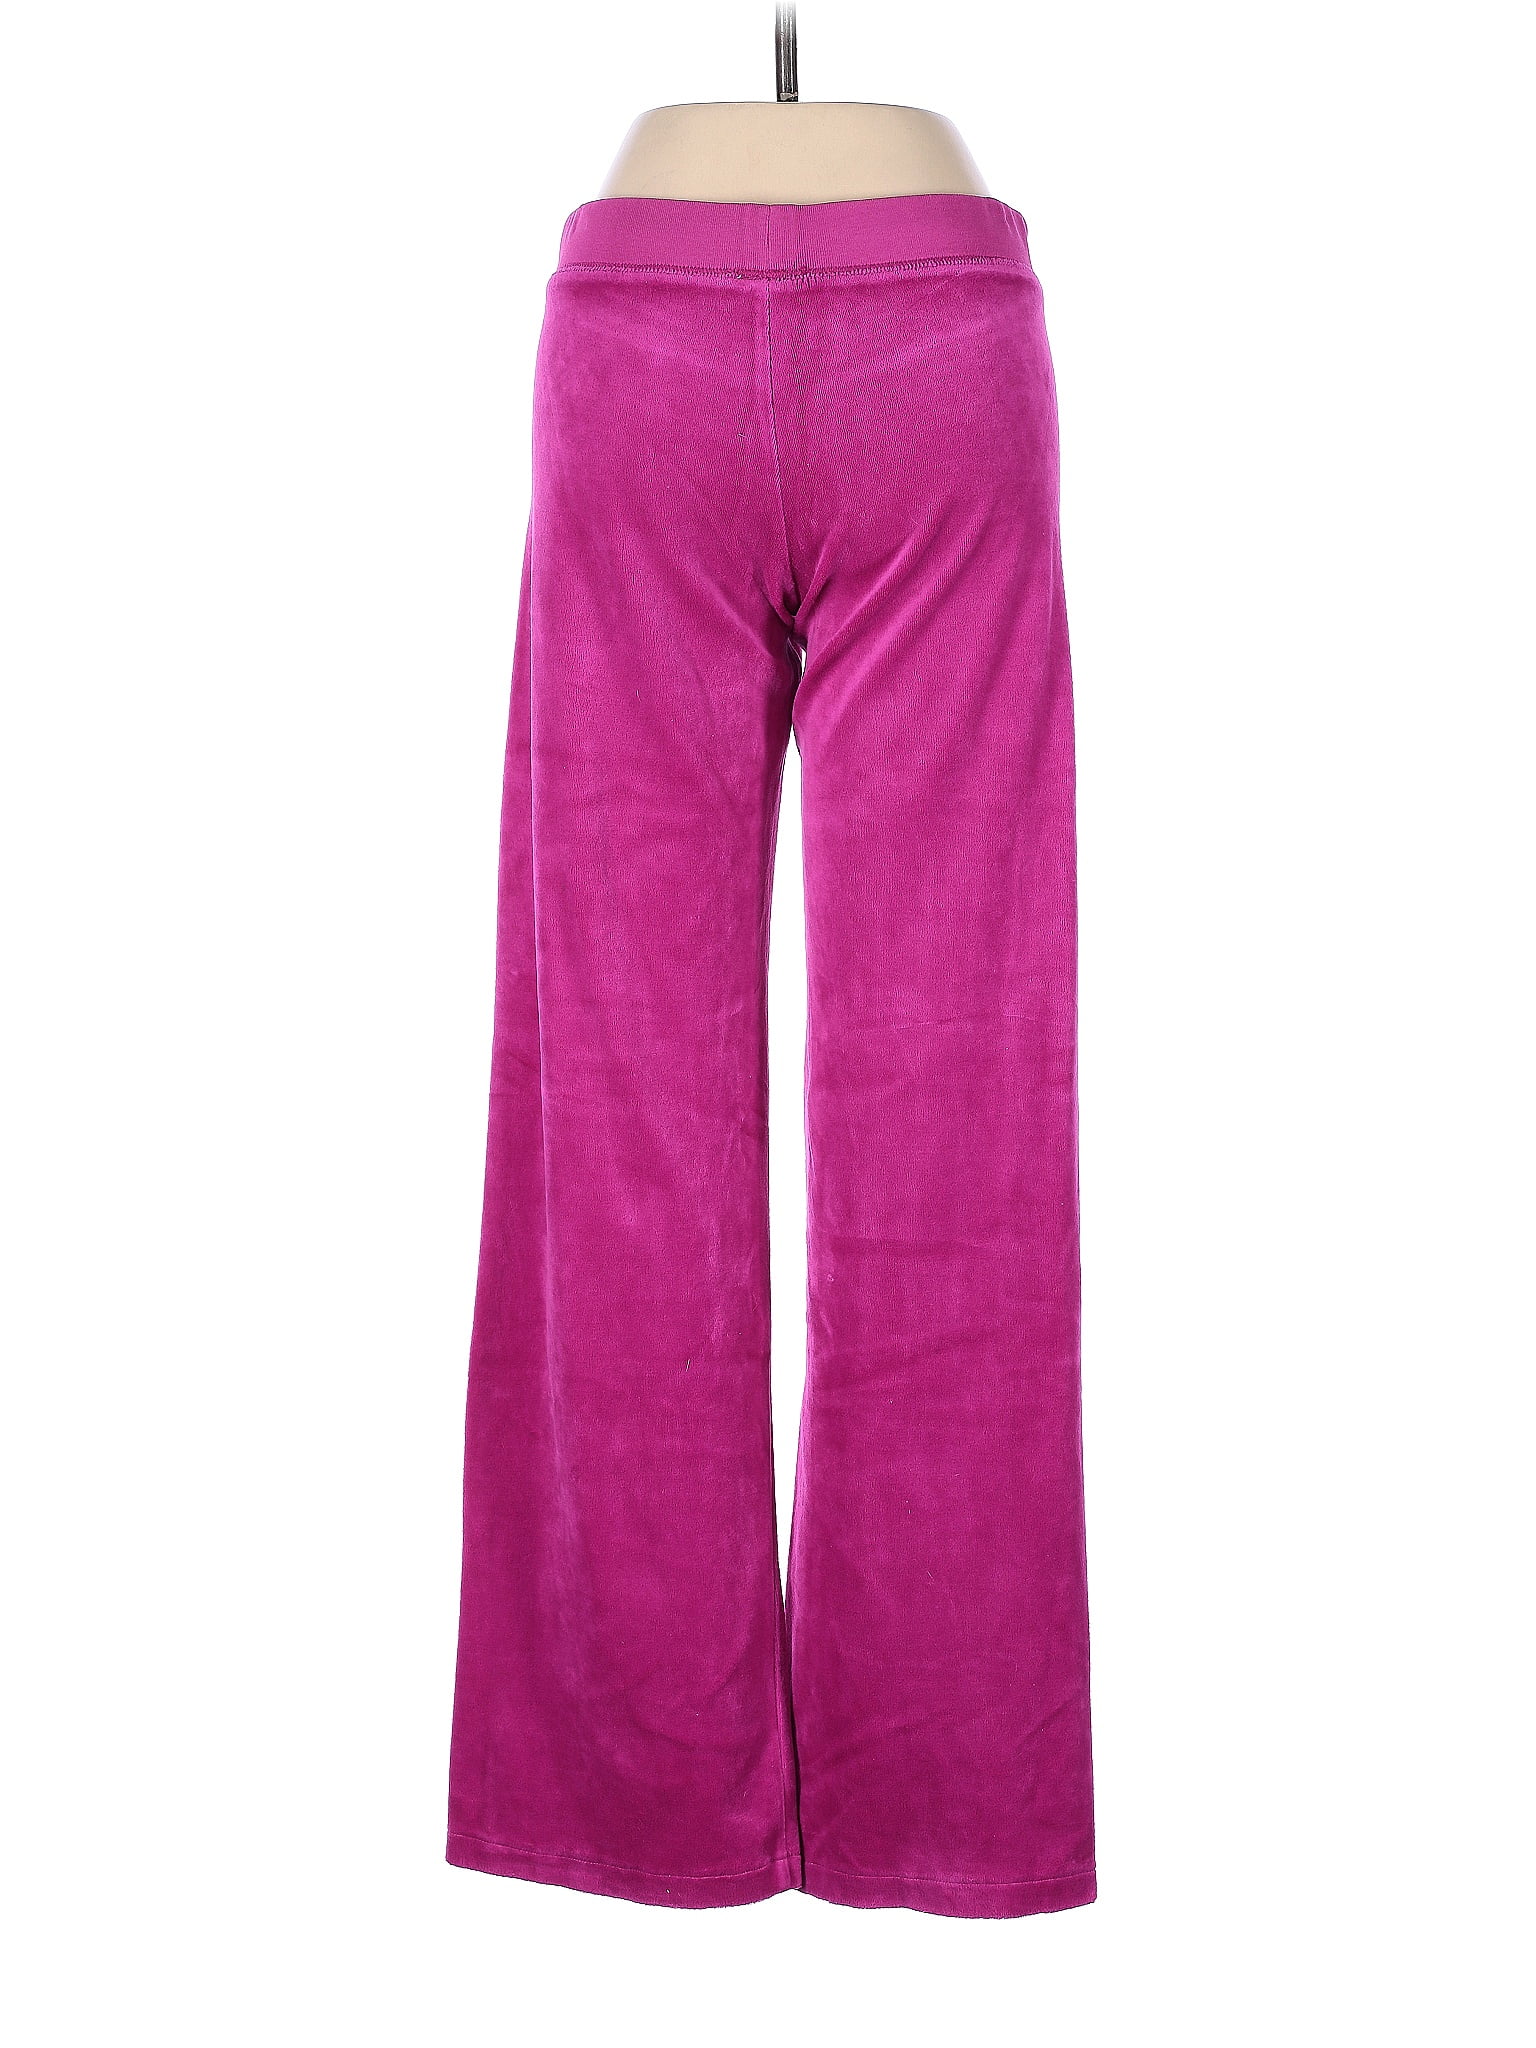 Juicy Couture Solid Pink Purple Sweatpants Size P - 74% off